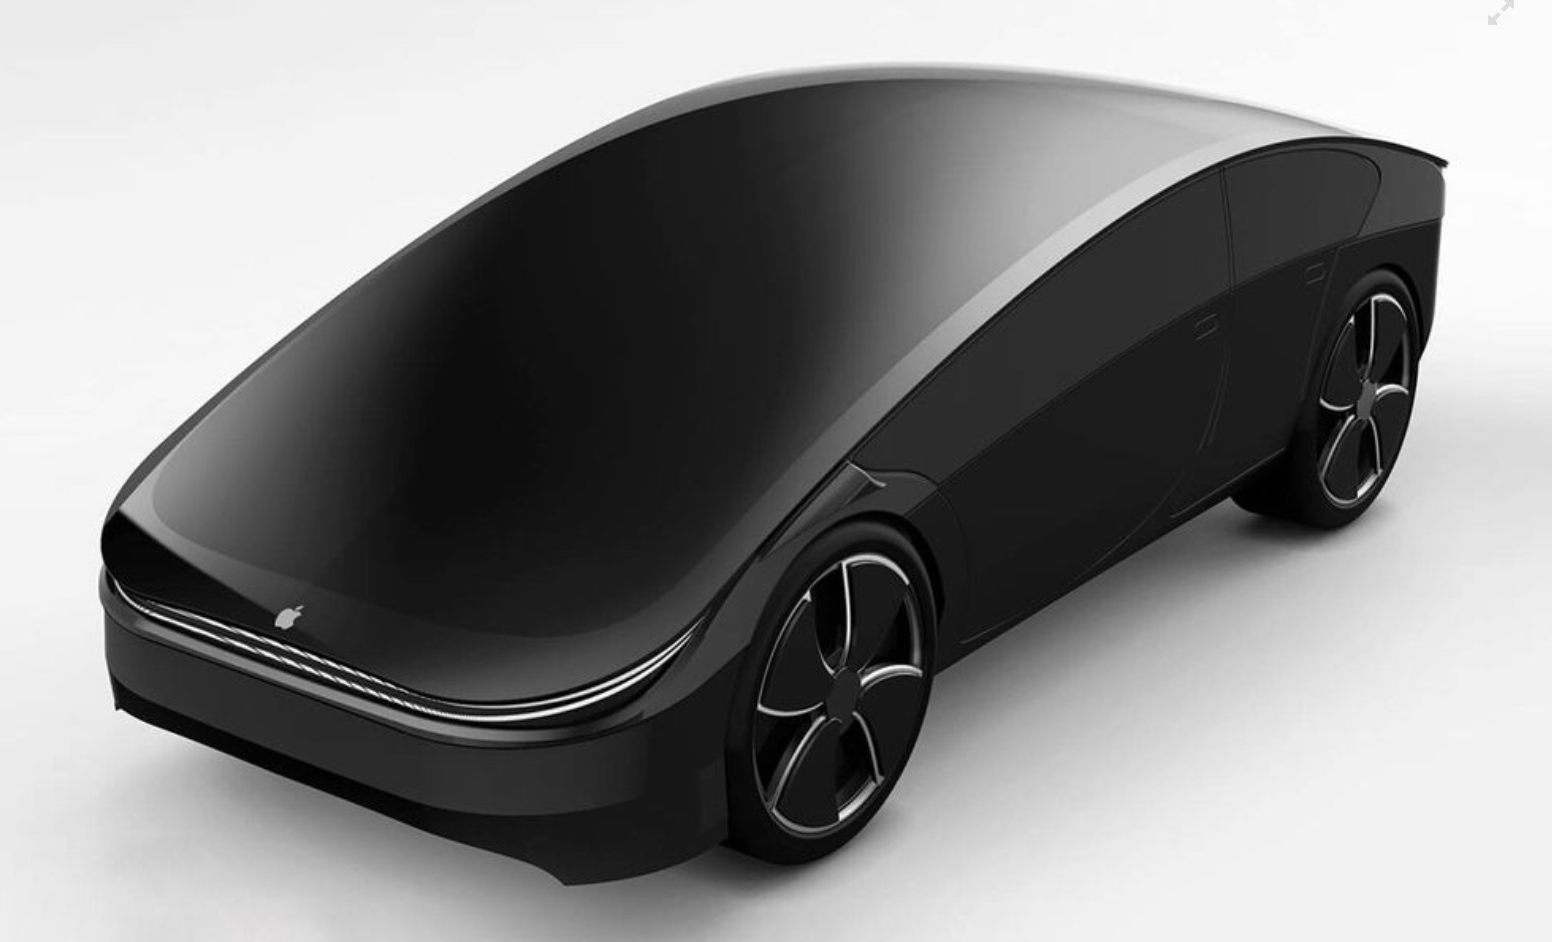 Apple Car Could Be Introduced Later This Year